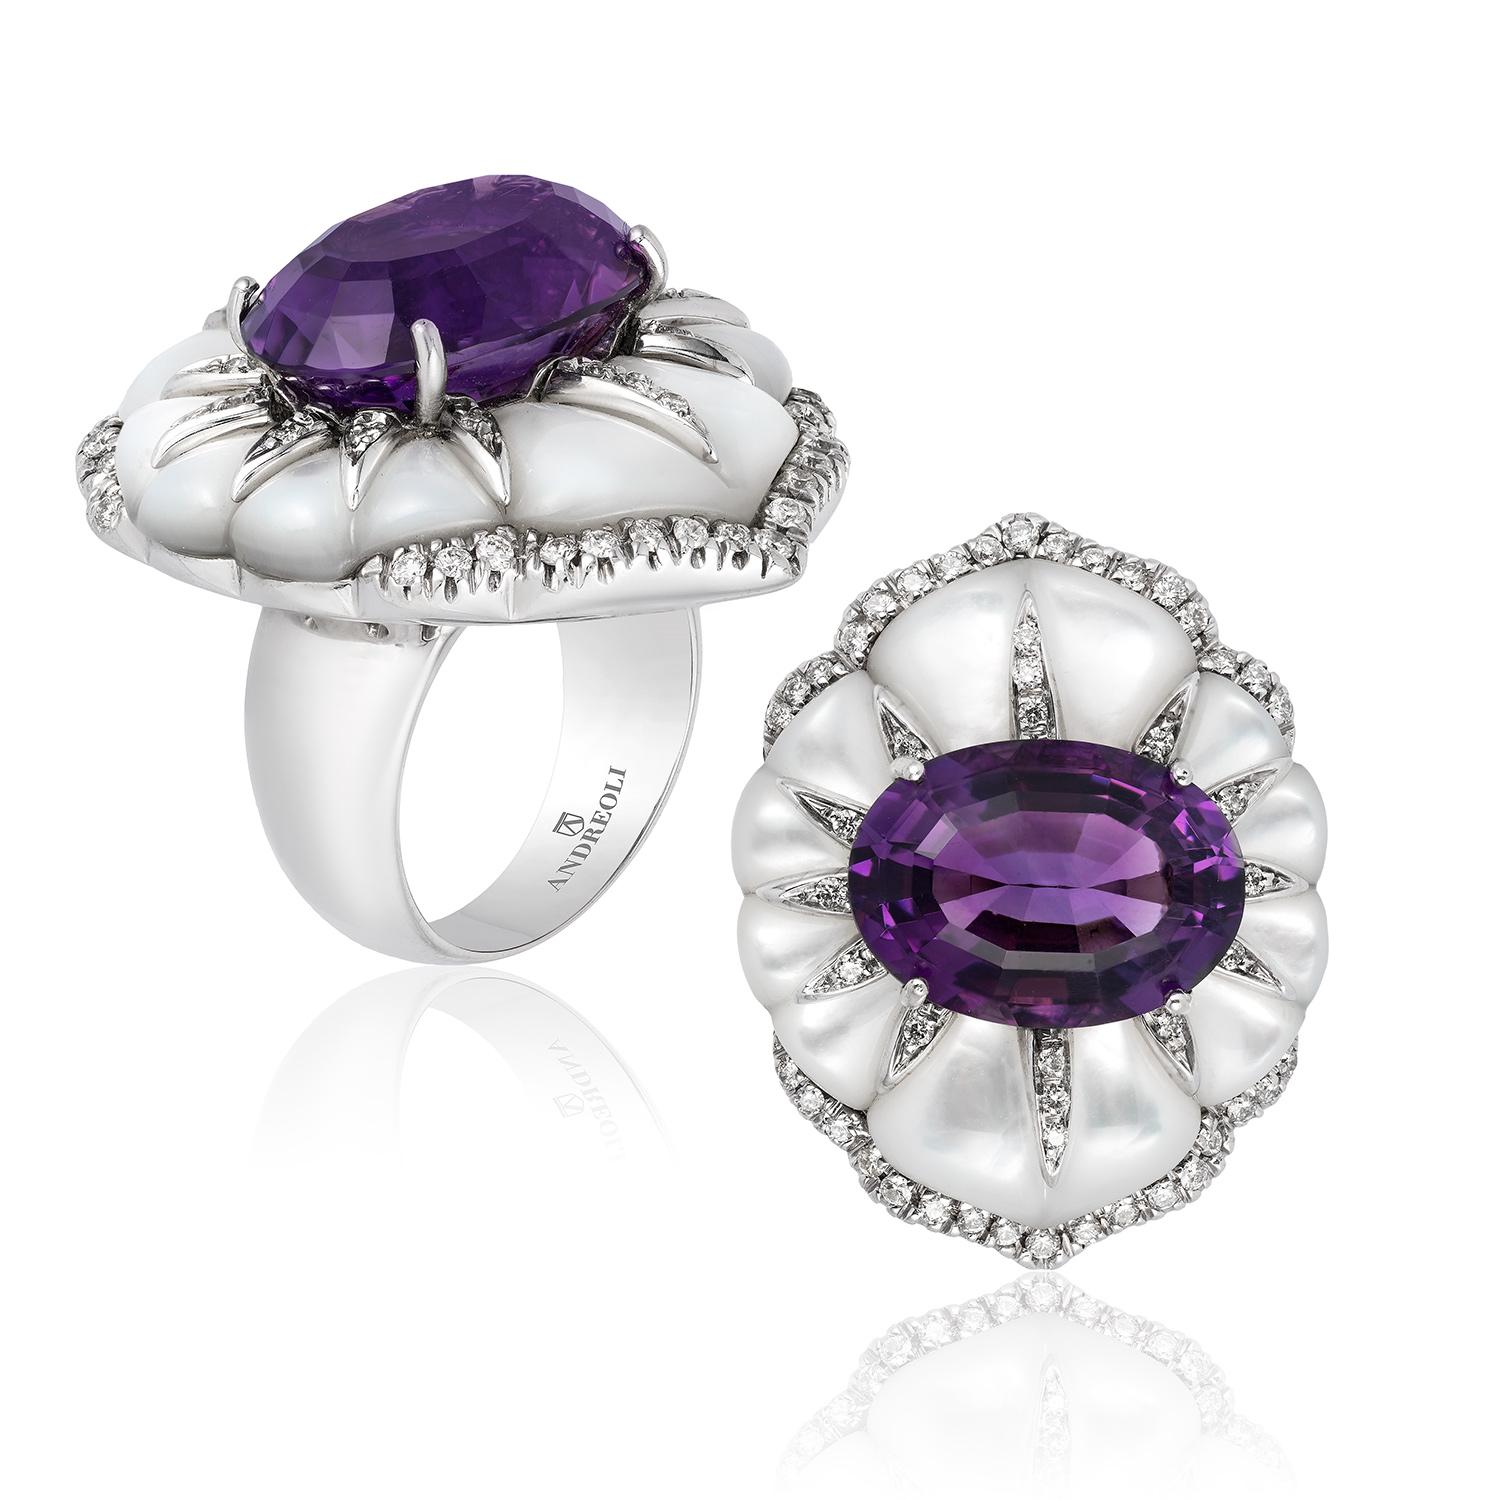 Contemporary Andreoli Amethyst Mother of Pearl Diamond Cocktail Ring 18 Karat White Gold